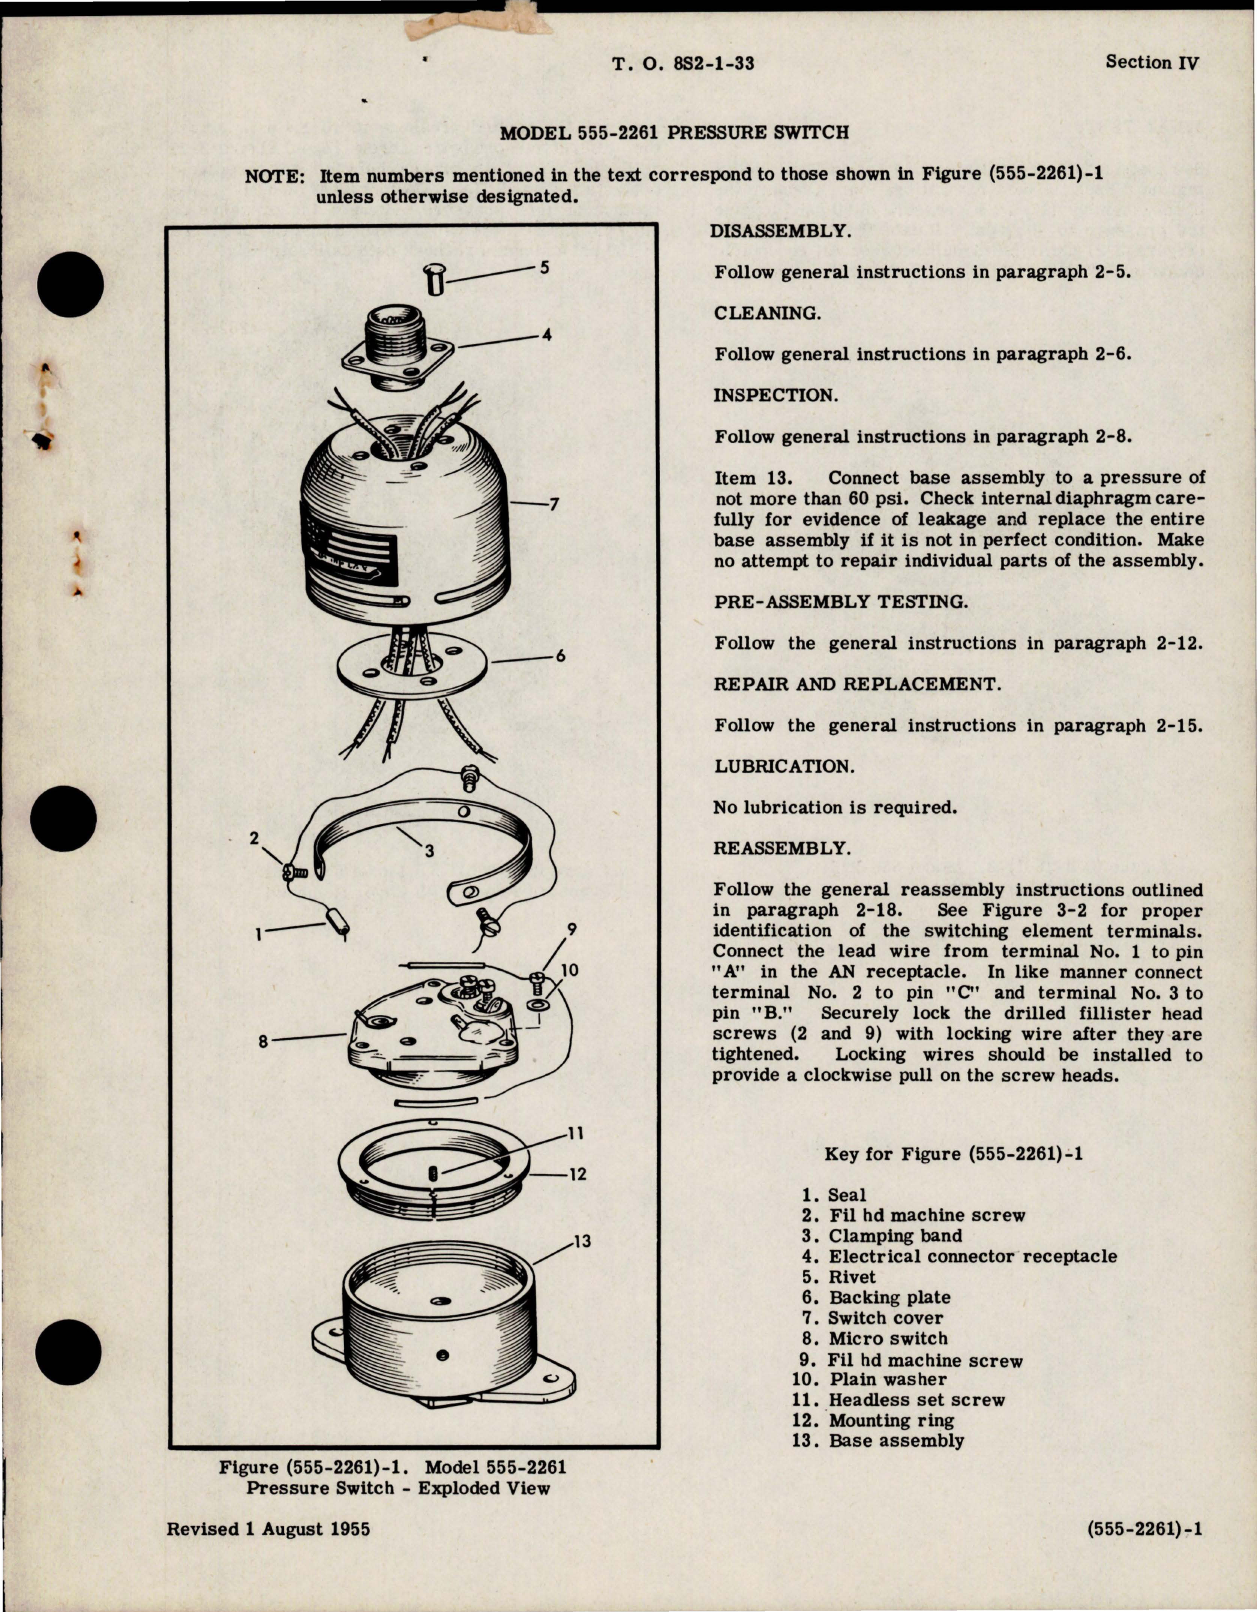 Sample page 5 from AirCorps Library document: Overhaul Instructions for Pressure Control Switches 